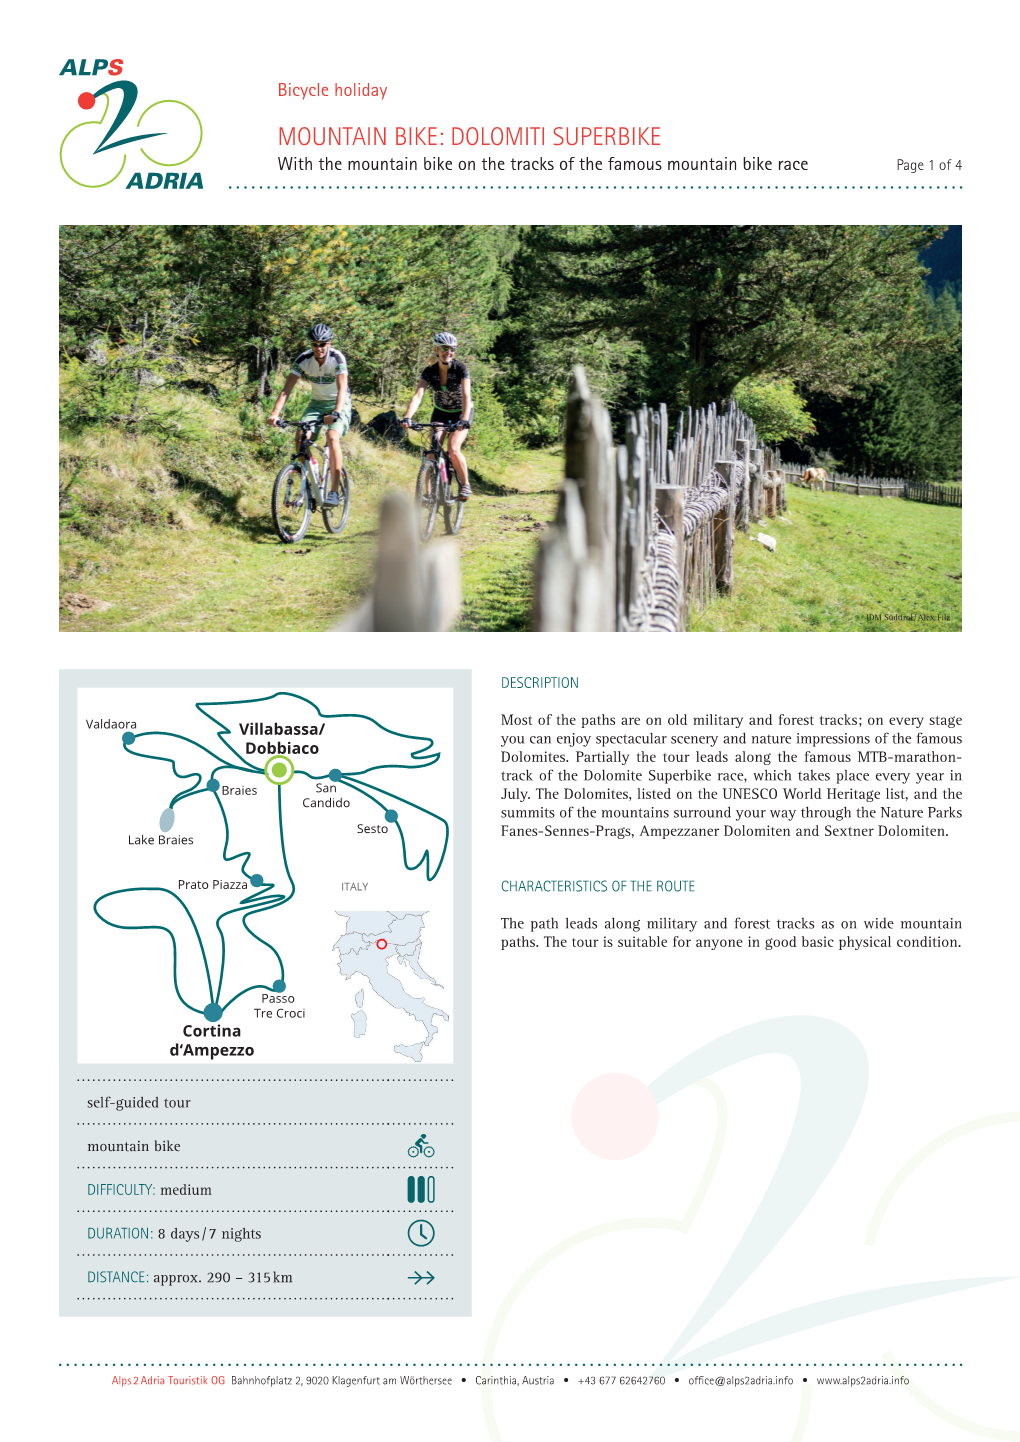 MOUNTAIN BIKE: DOLOMITI SUPERBIKE with the Mountain Bike on the Tracks of the Famous Mountain Bike Race Page 1 of 4